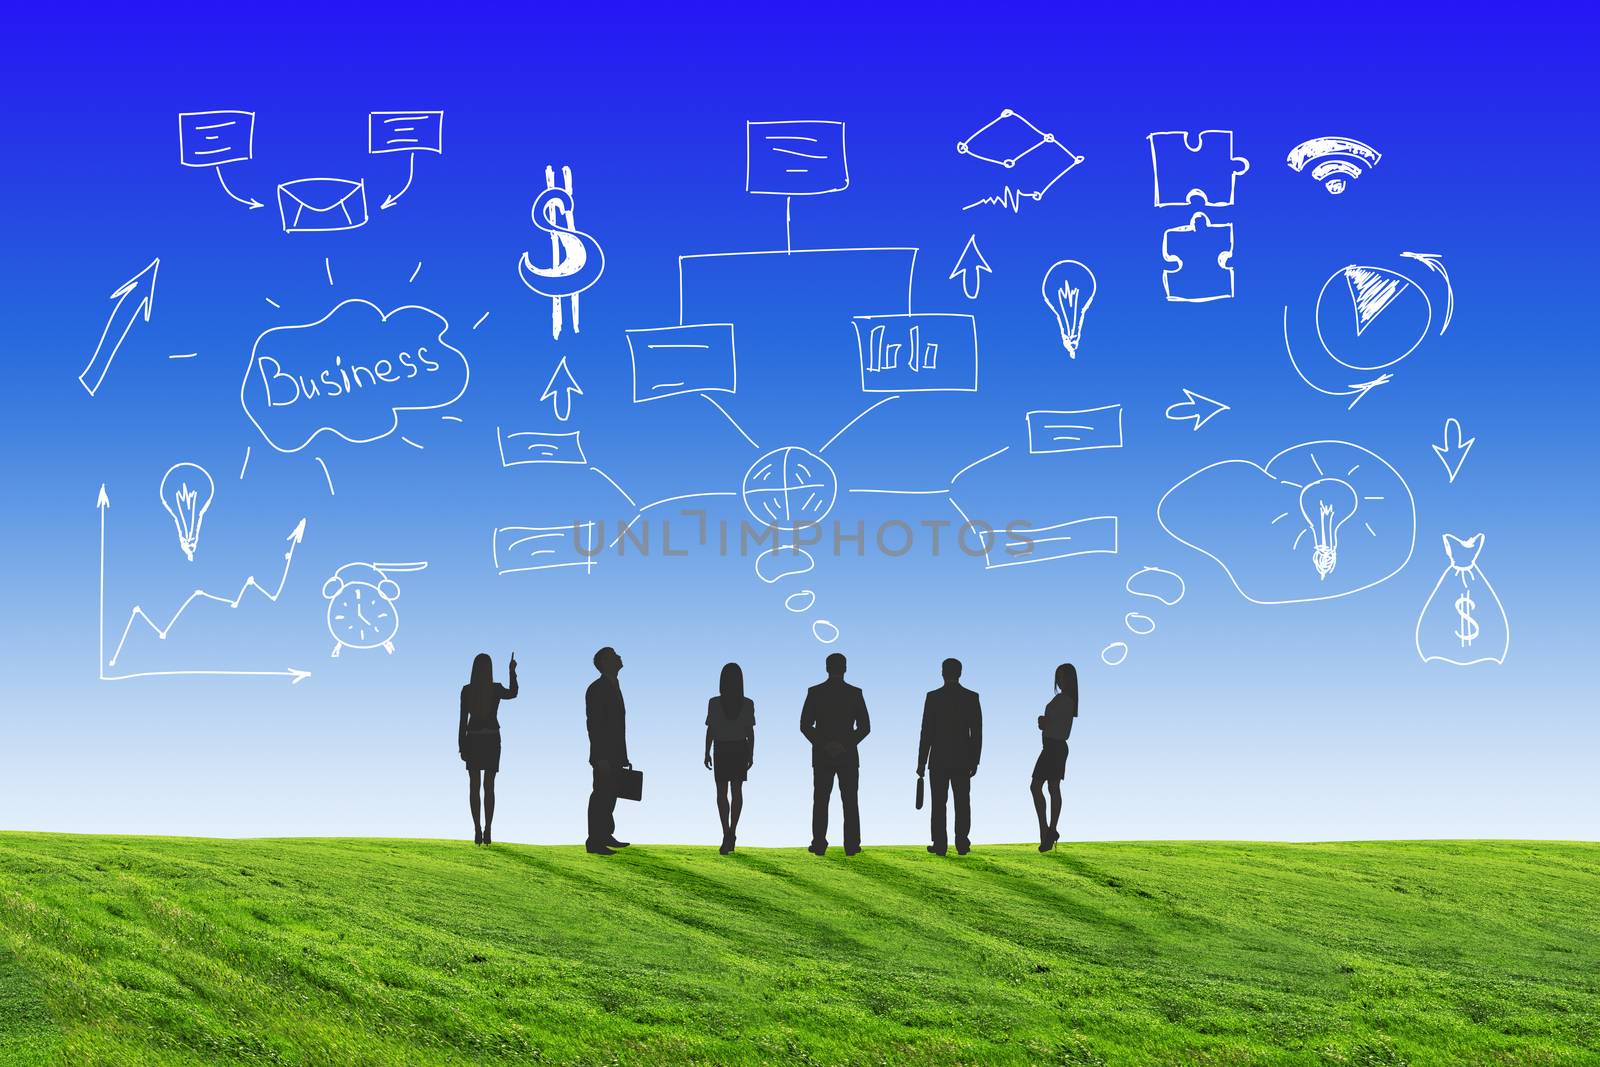 Set of business people silhouettes standing in different postures on nature background with symbols